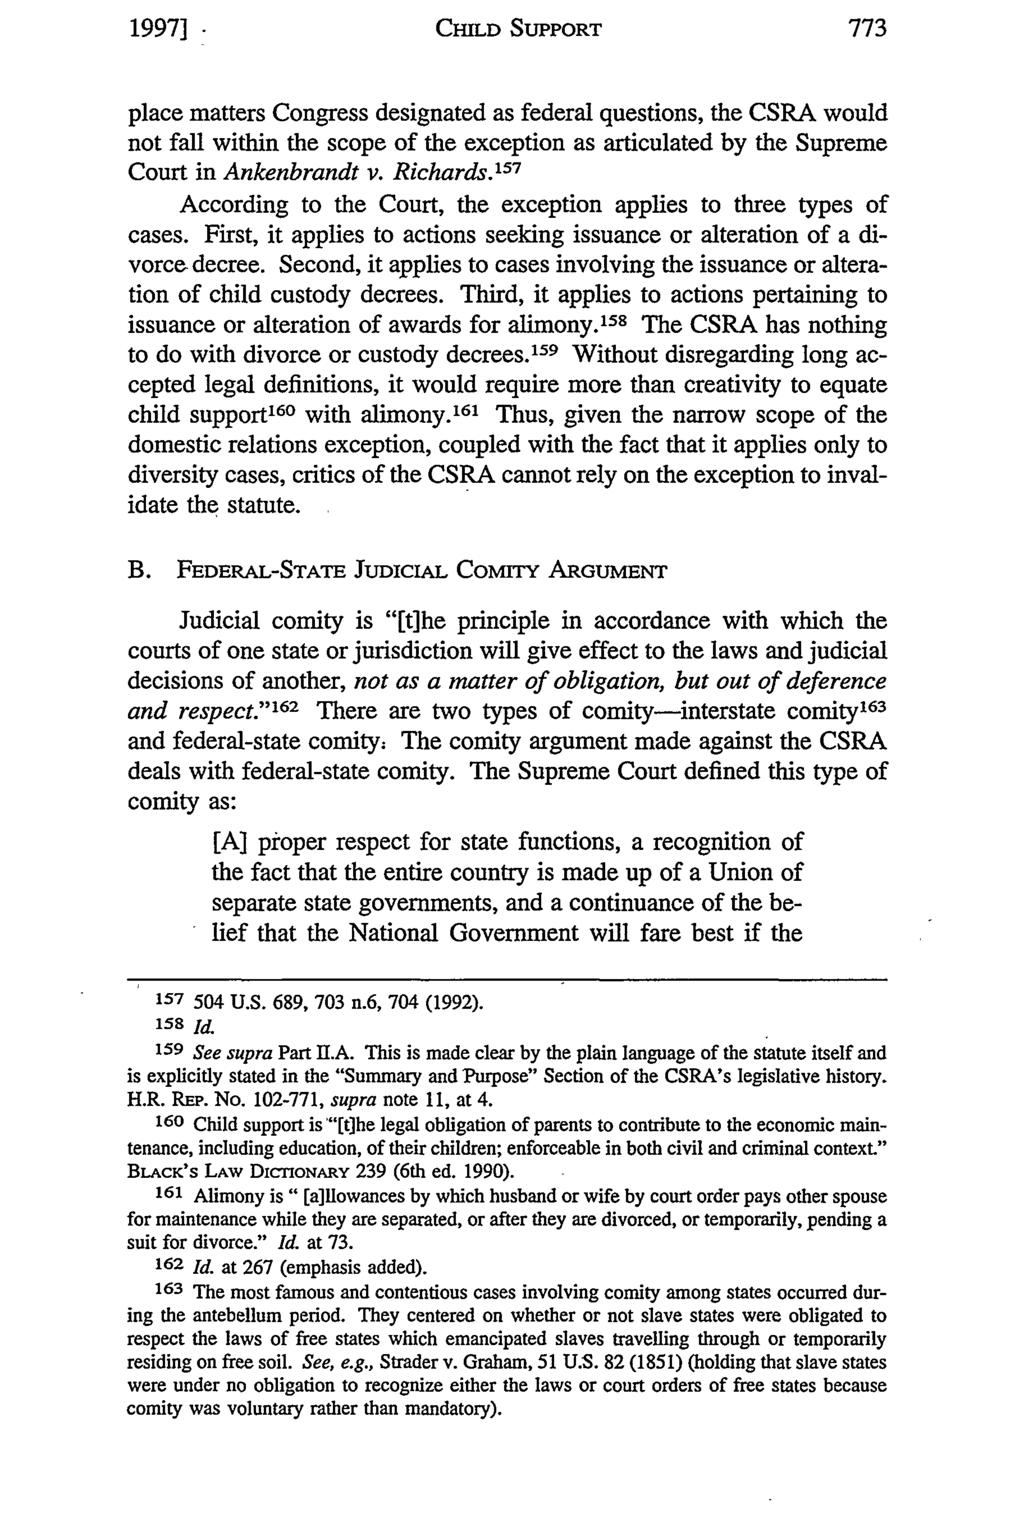 1997].- CHILD SUPPORT place matters Congress designated as federal questions, the CSRA would not fall within the scope of the exception as articulated by the Supreme Court in Ankenbrandt v. Richards.